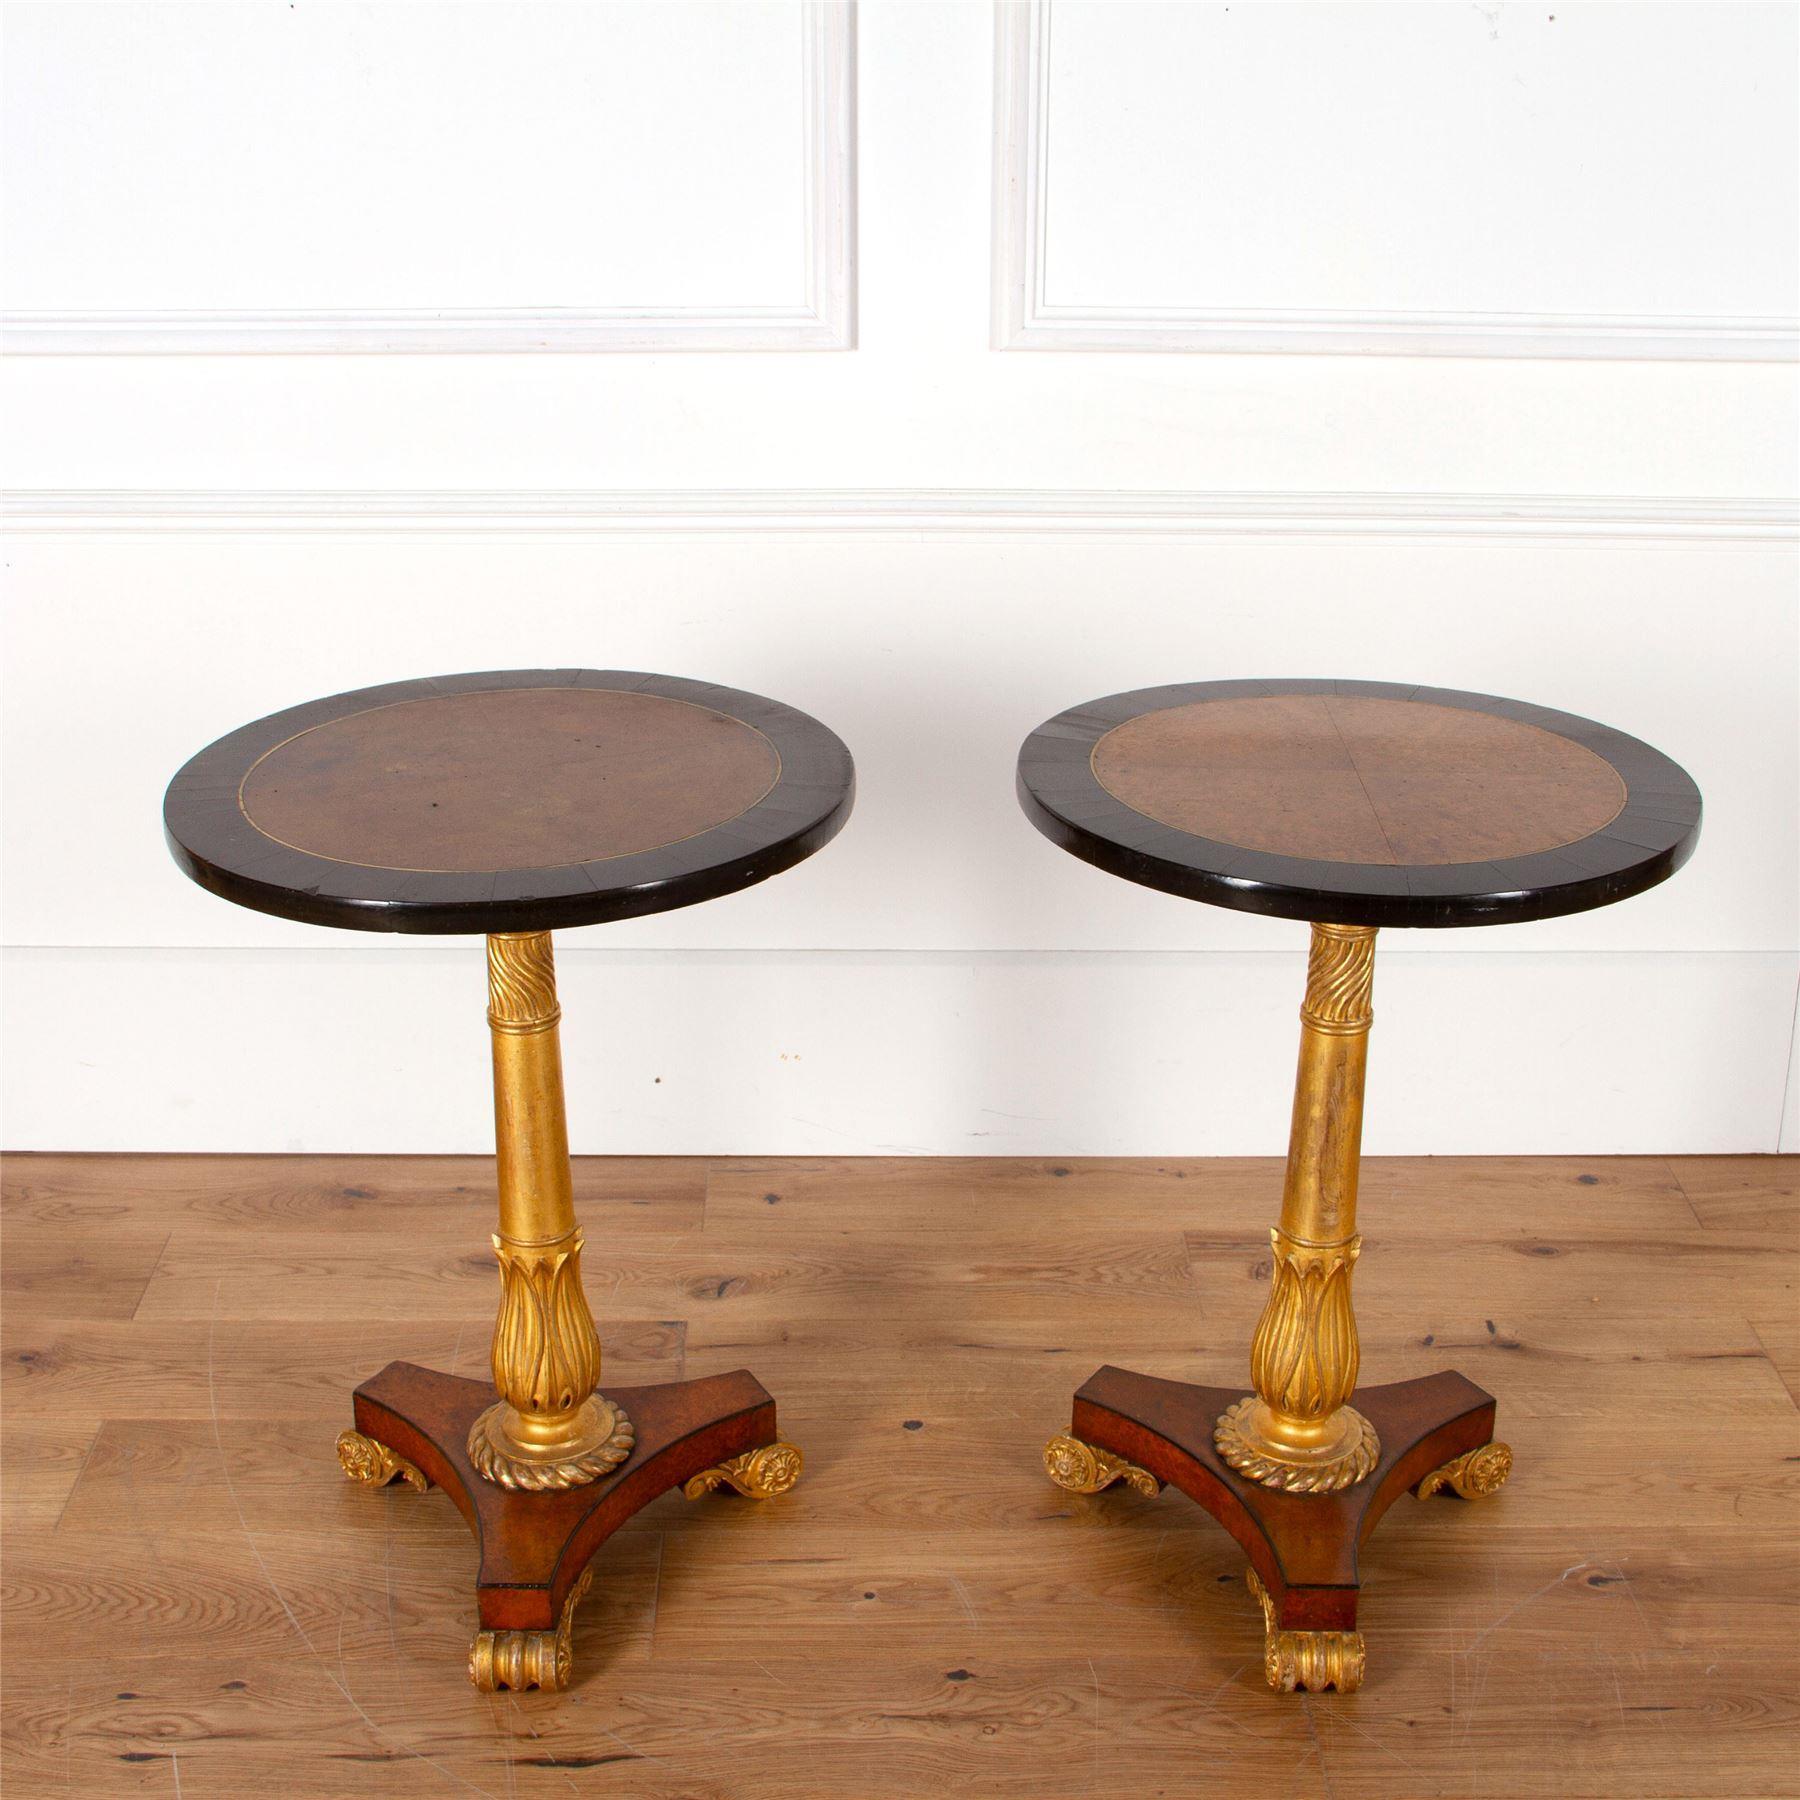 A rare pair of early English 19th century Amboyna ebony and parcel gilt side tables of superb quality.